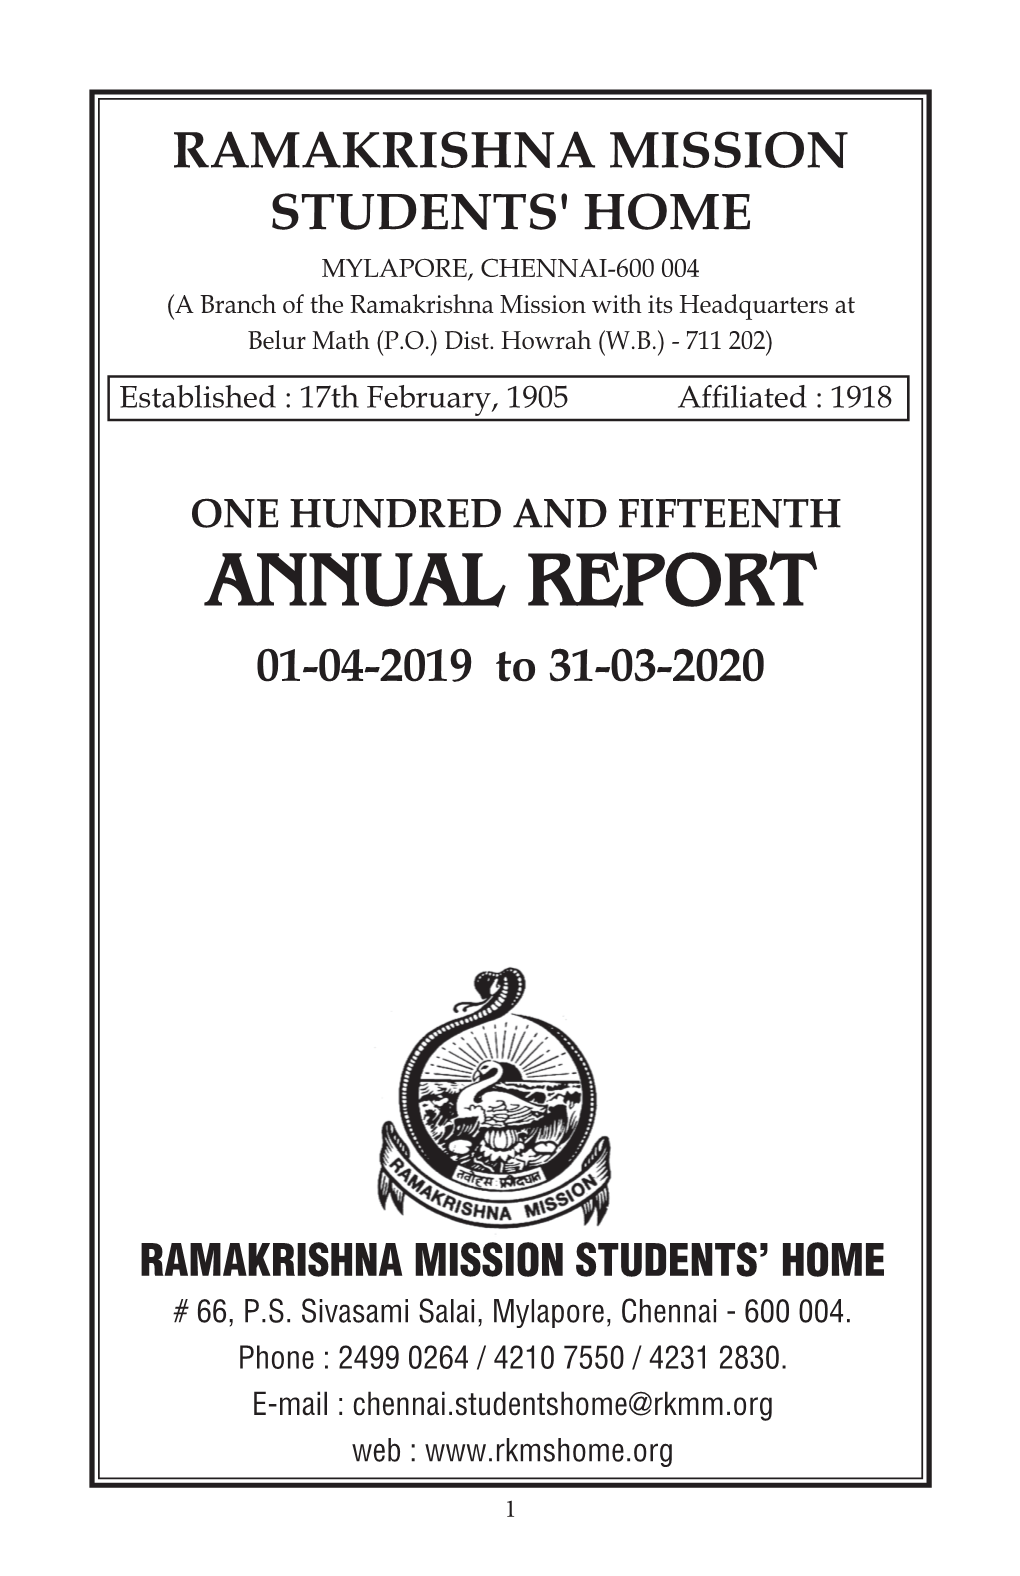 ANNUAL REPORT 01-04-2019 to 31-03-2020